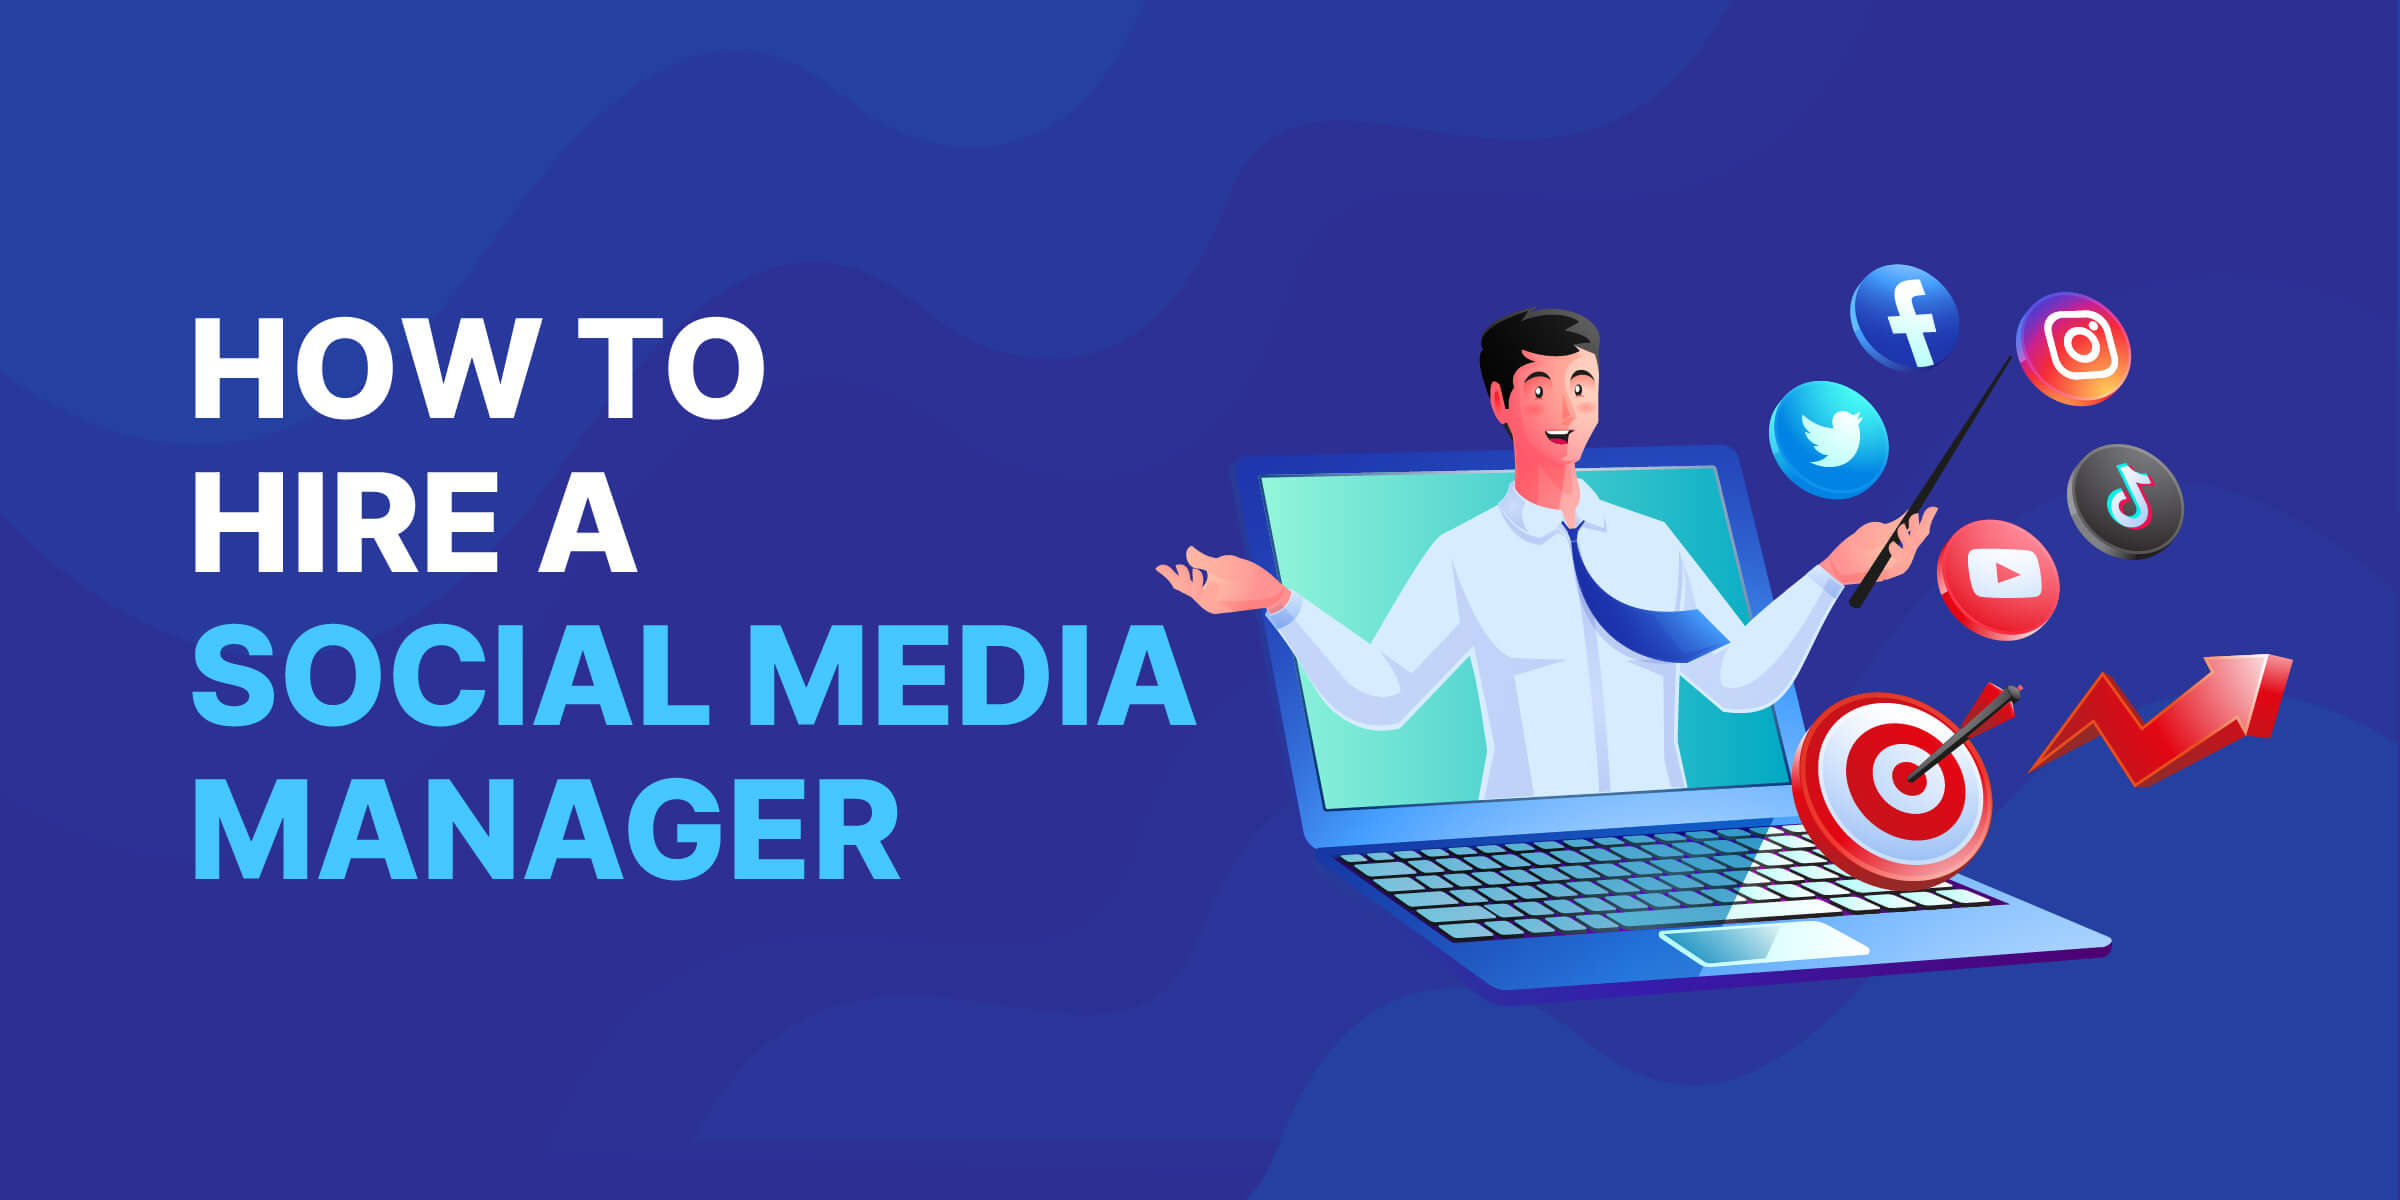 How to Hire Social Media Manager